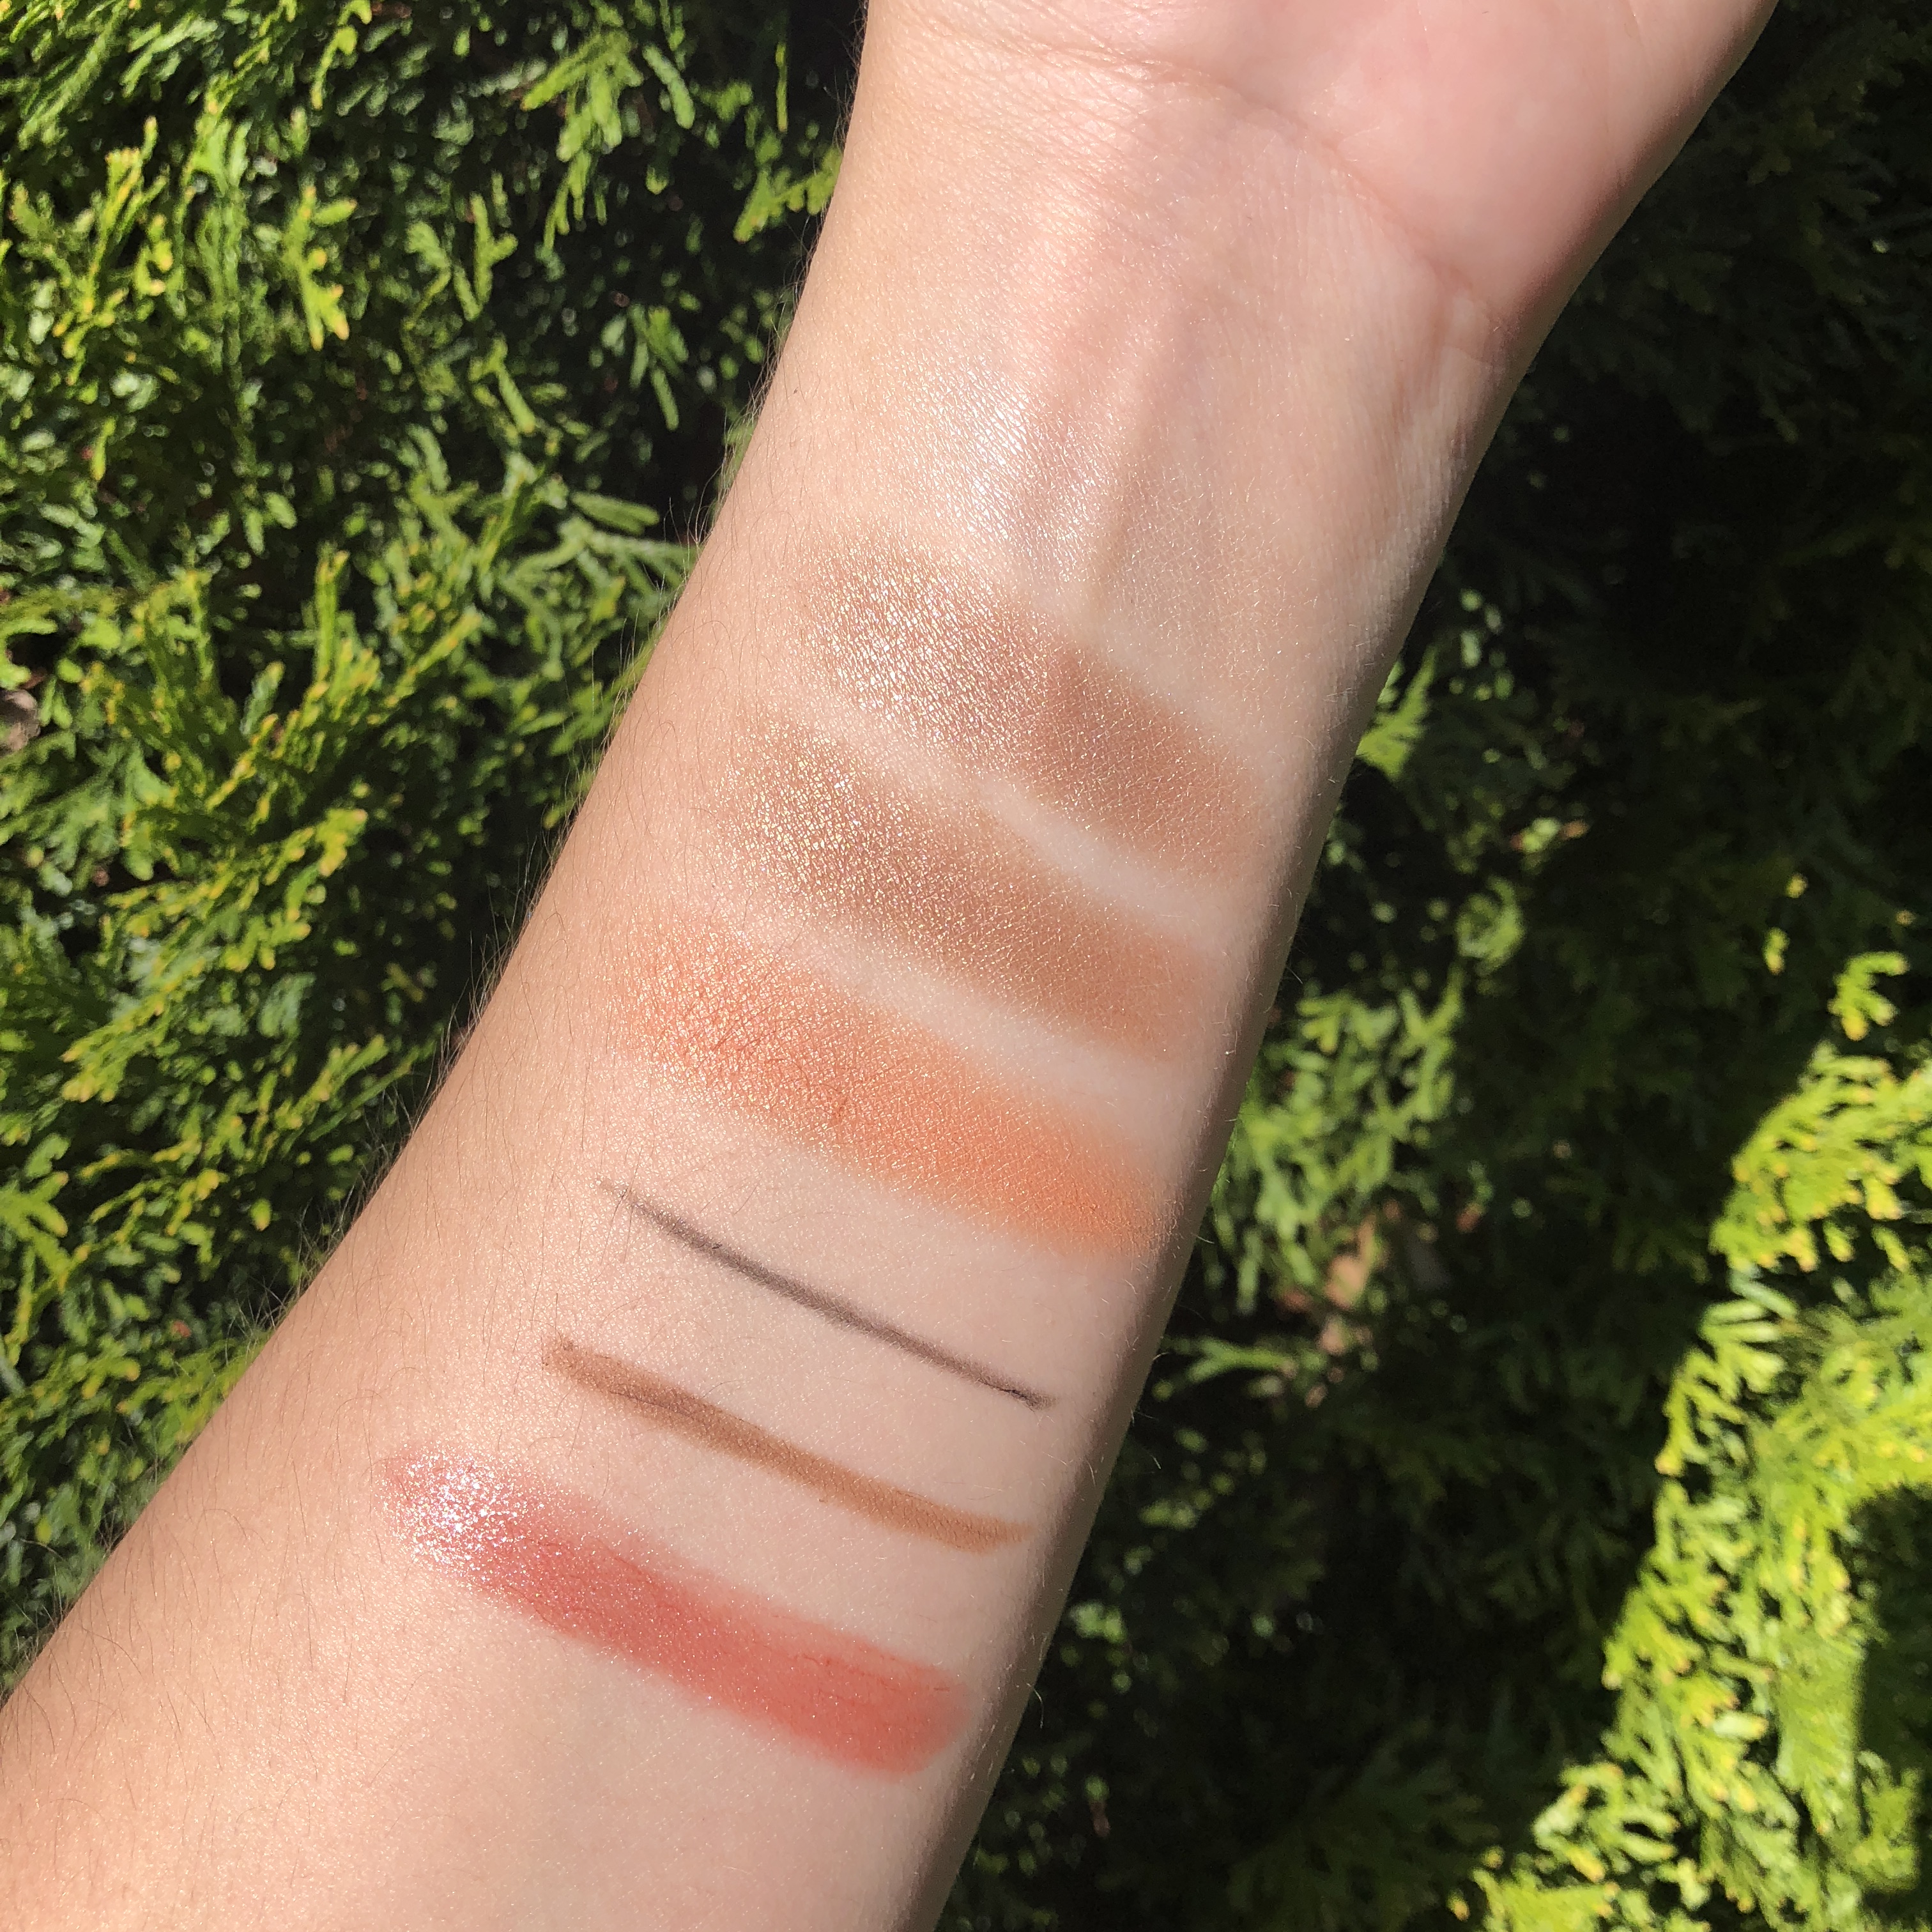 Burts Bees Makeup Swatches in natural light